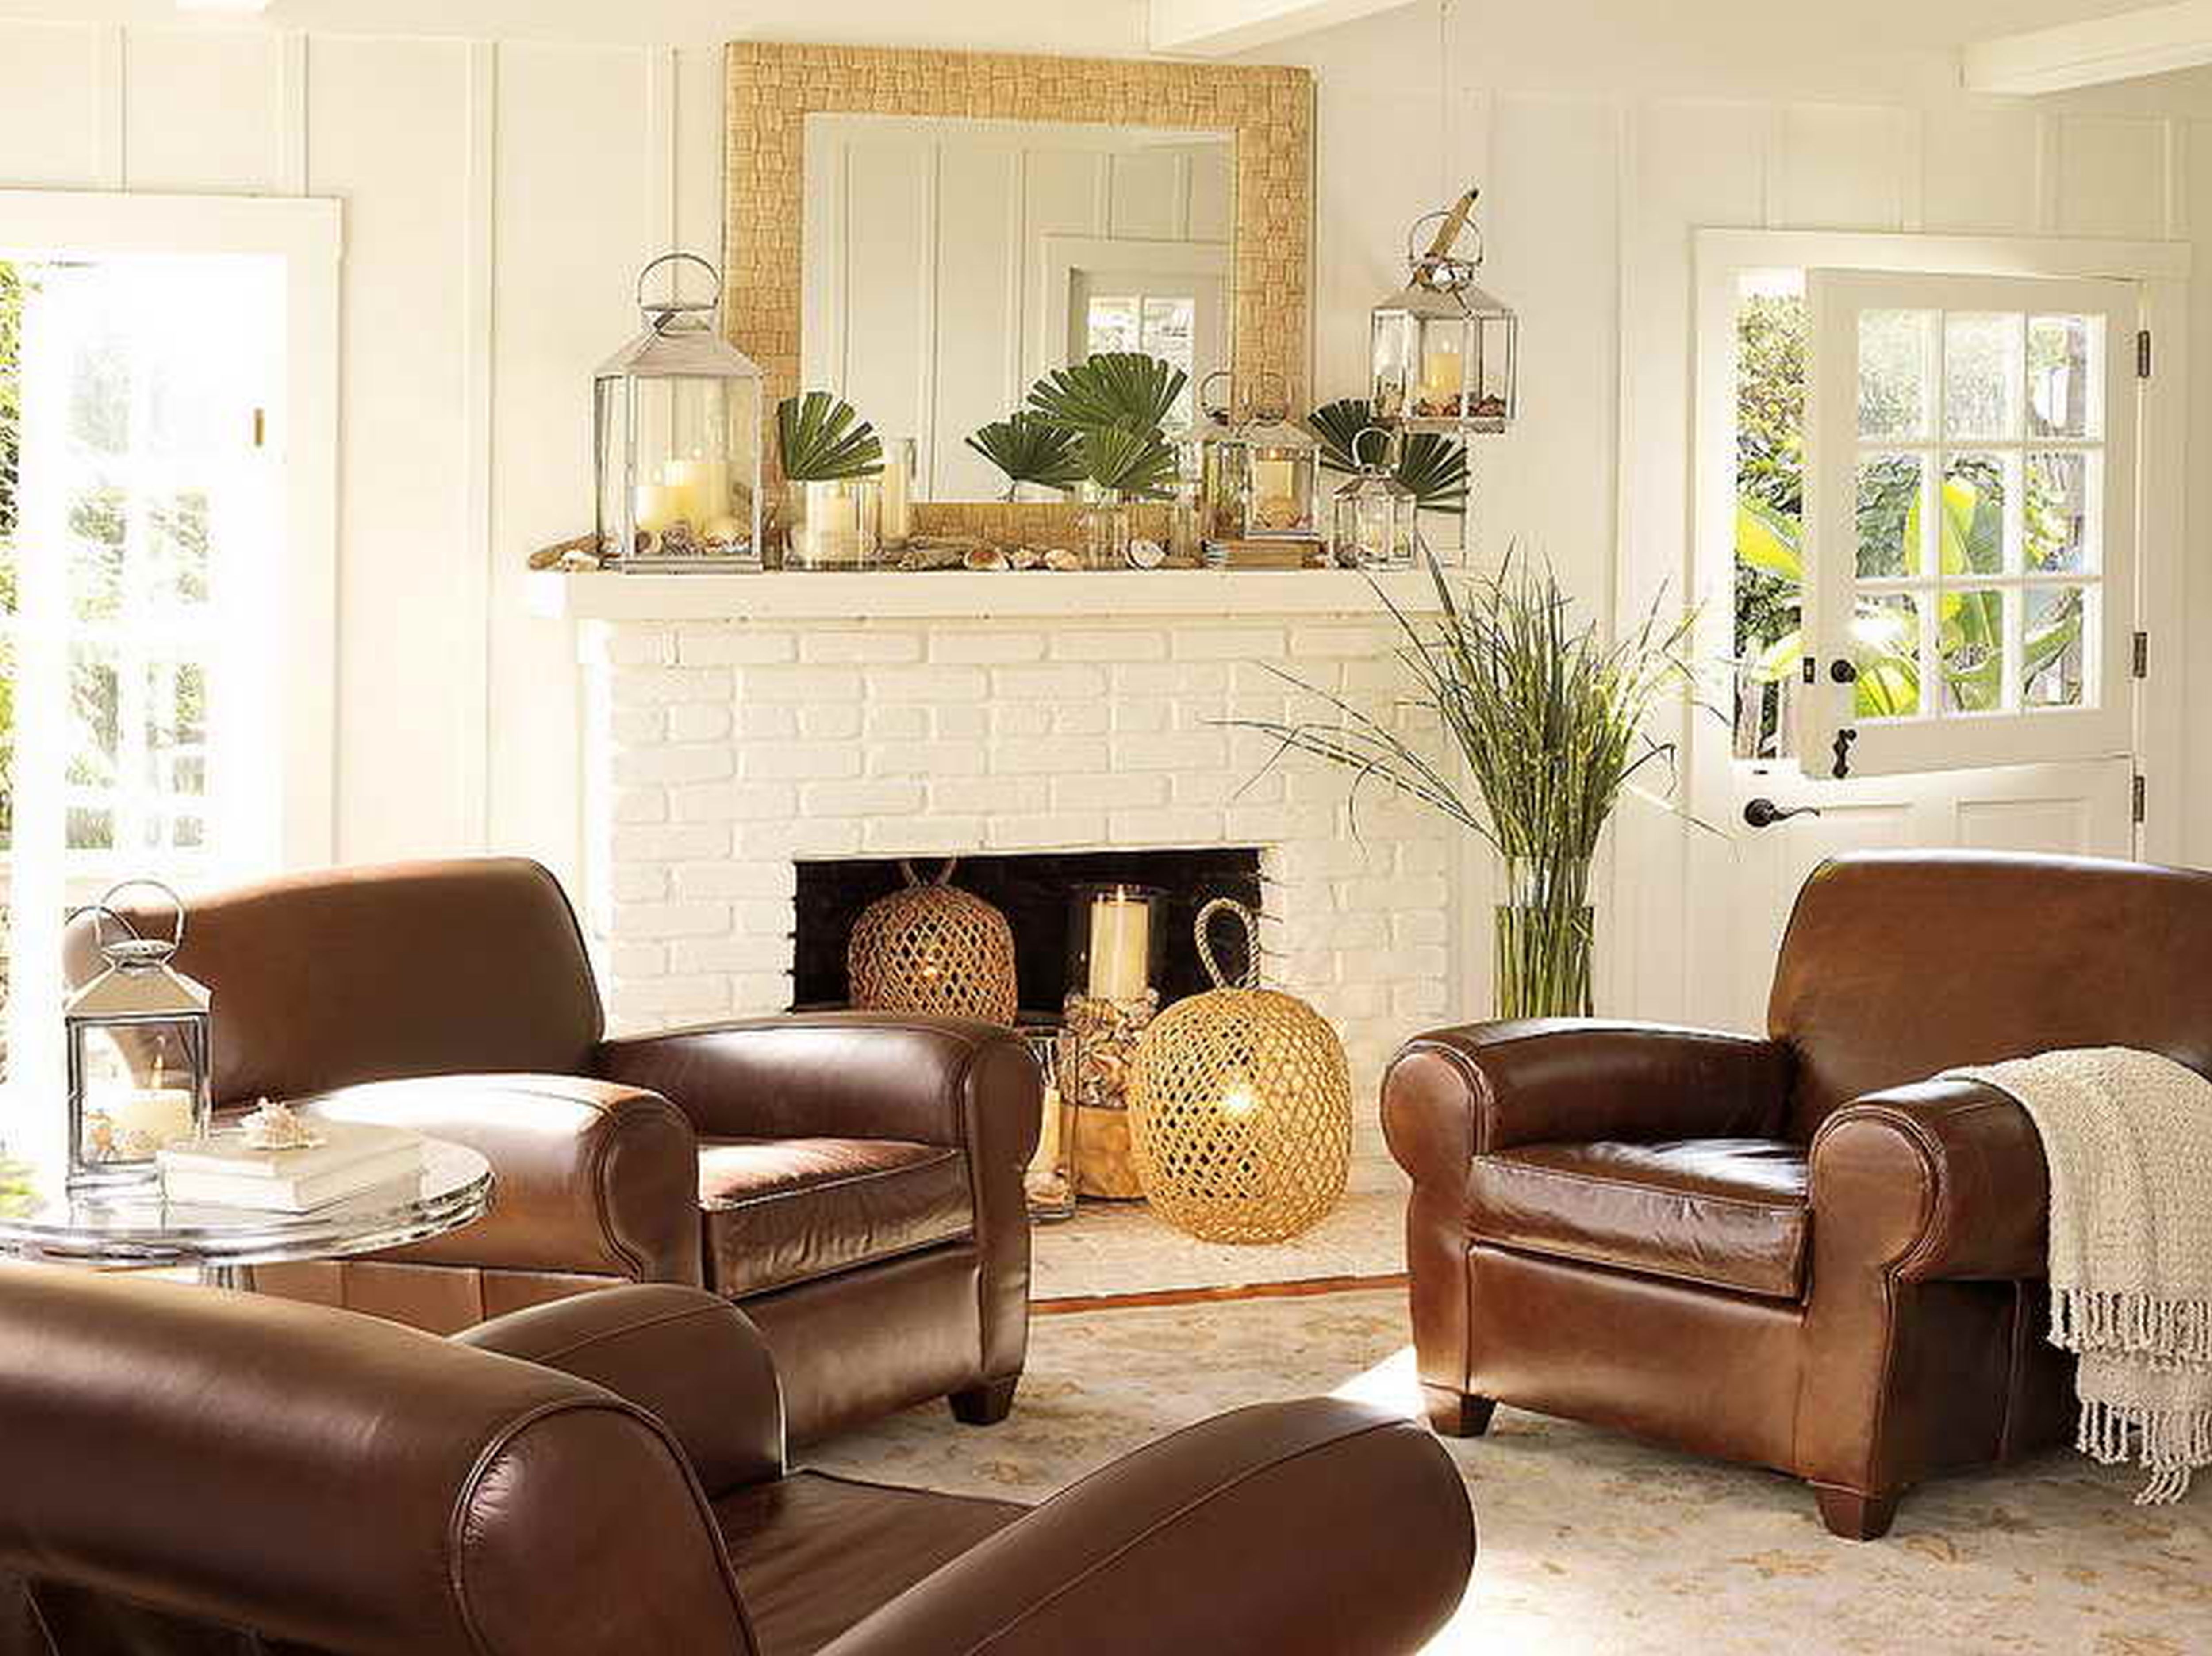 inexpensive decorating ideas for living room